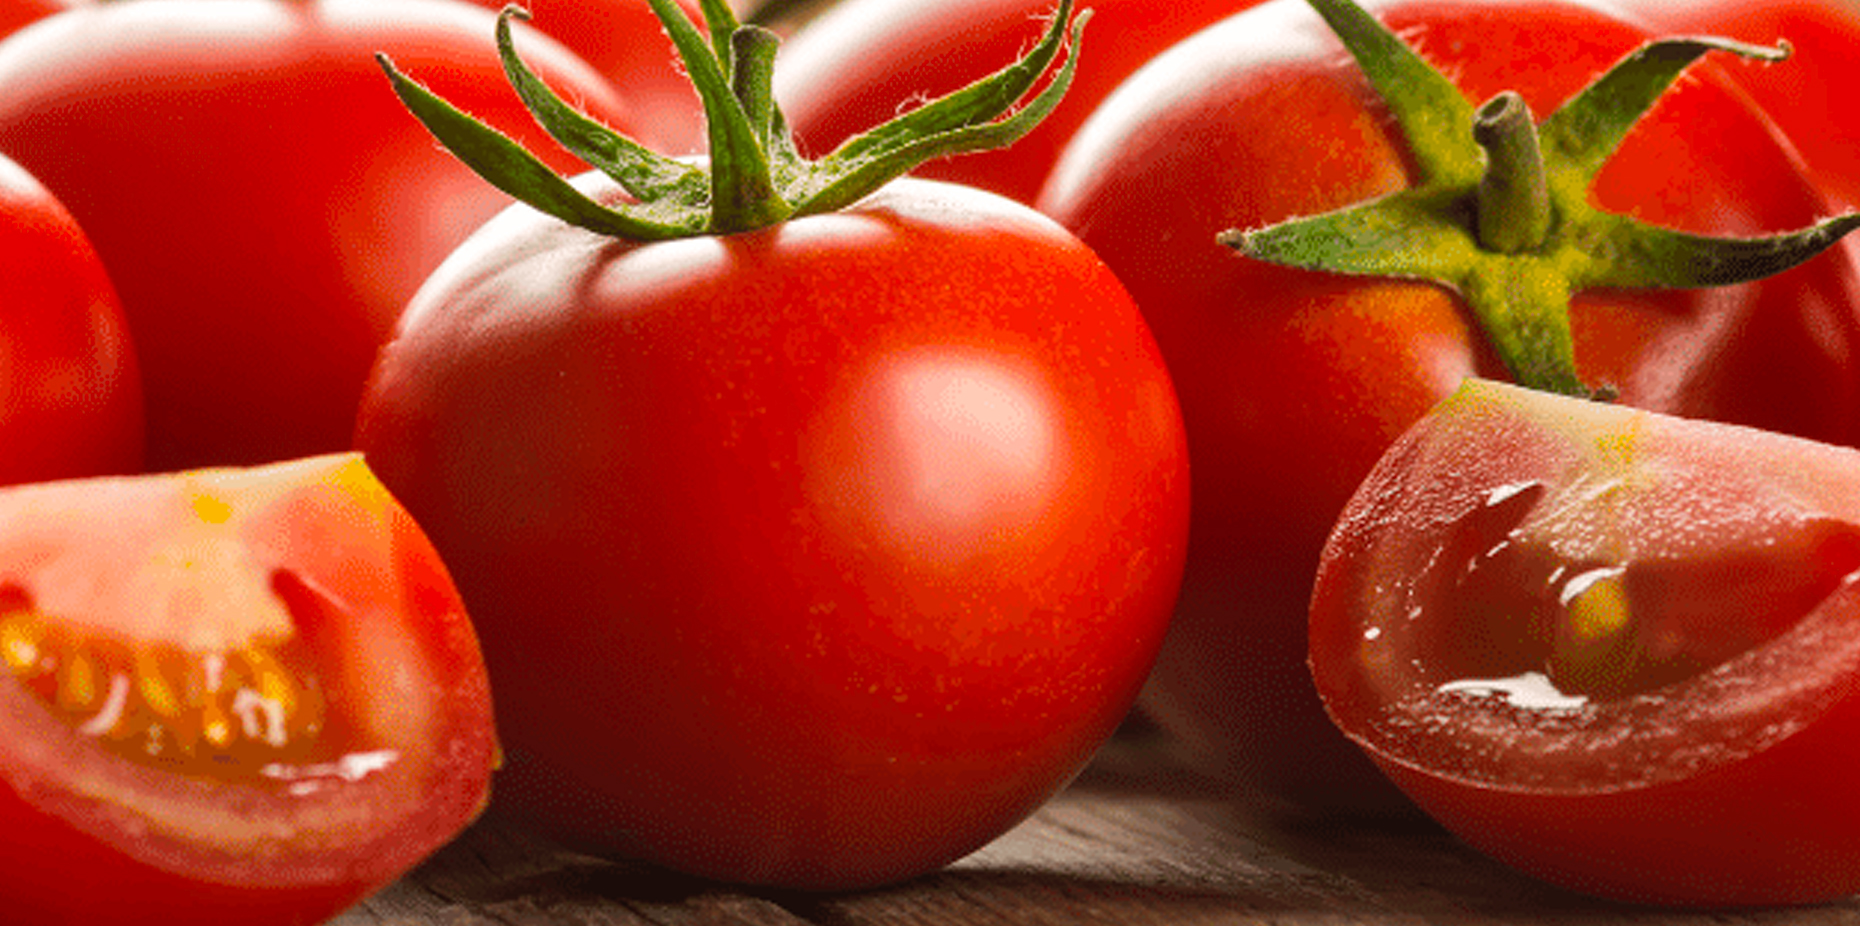 Tomato: Facts, Nutrition, Benefits, & More